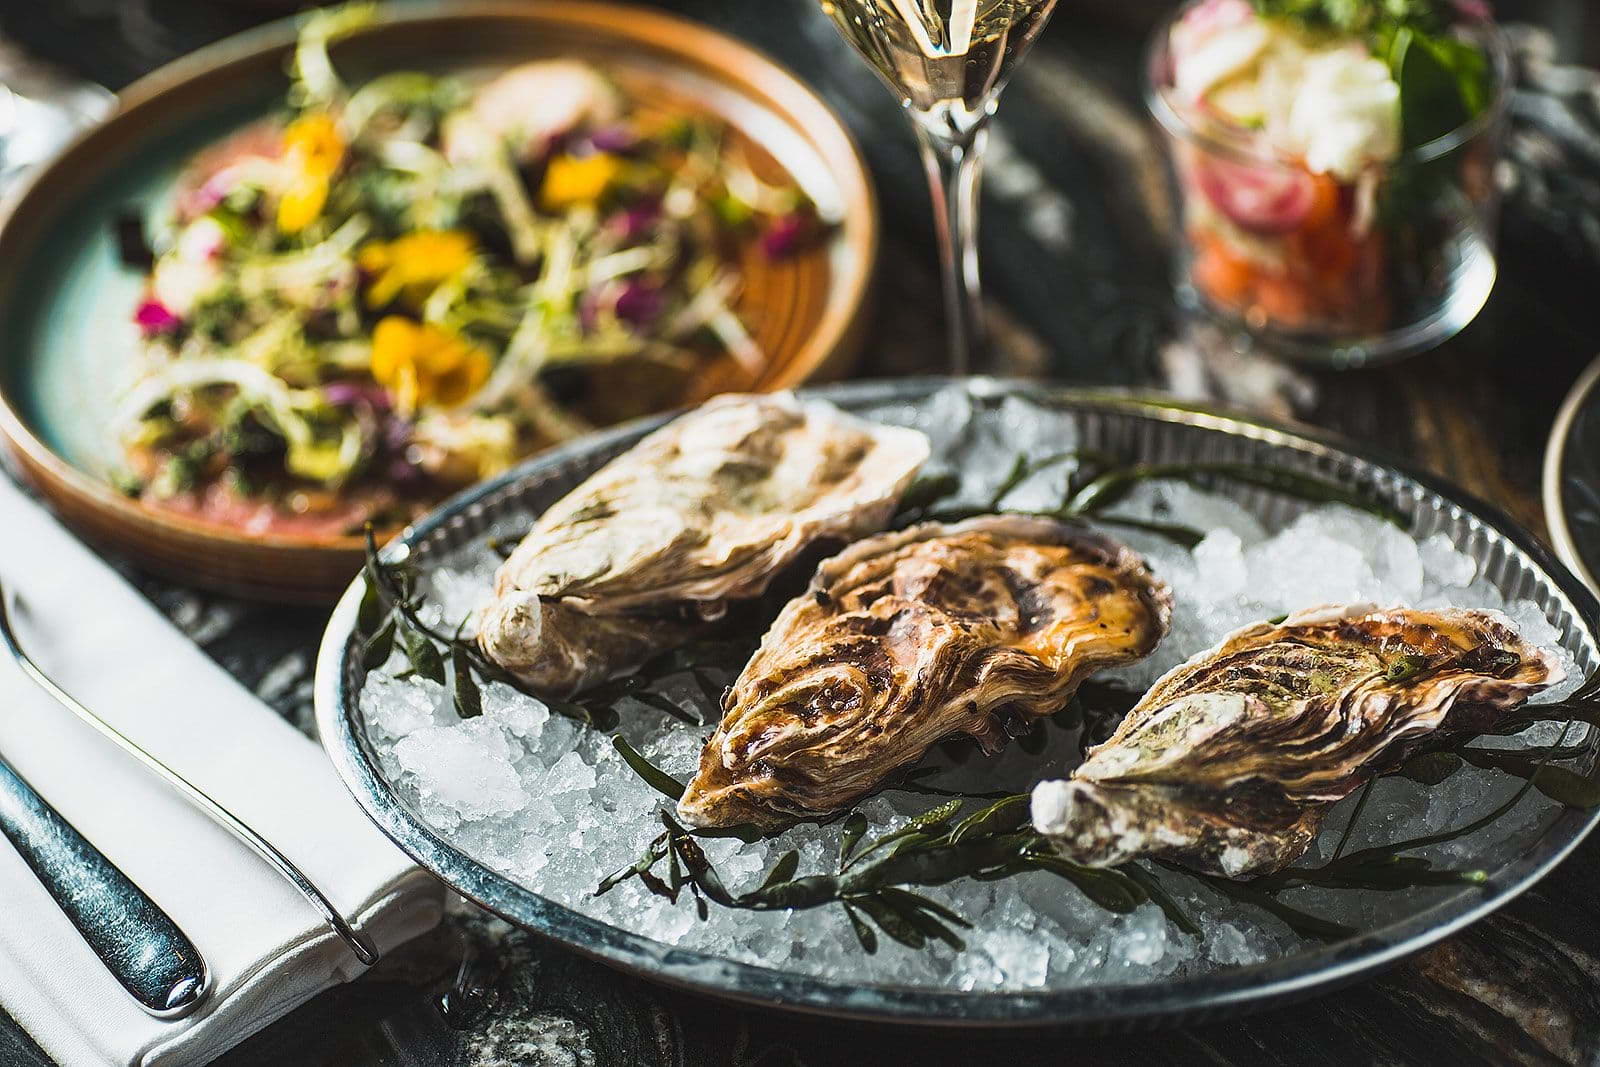 Guide to the best restaurants in Notting Hill